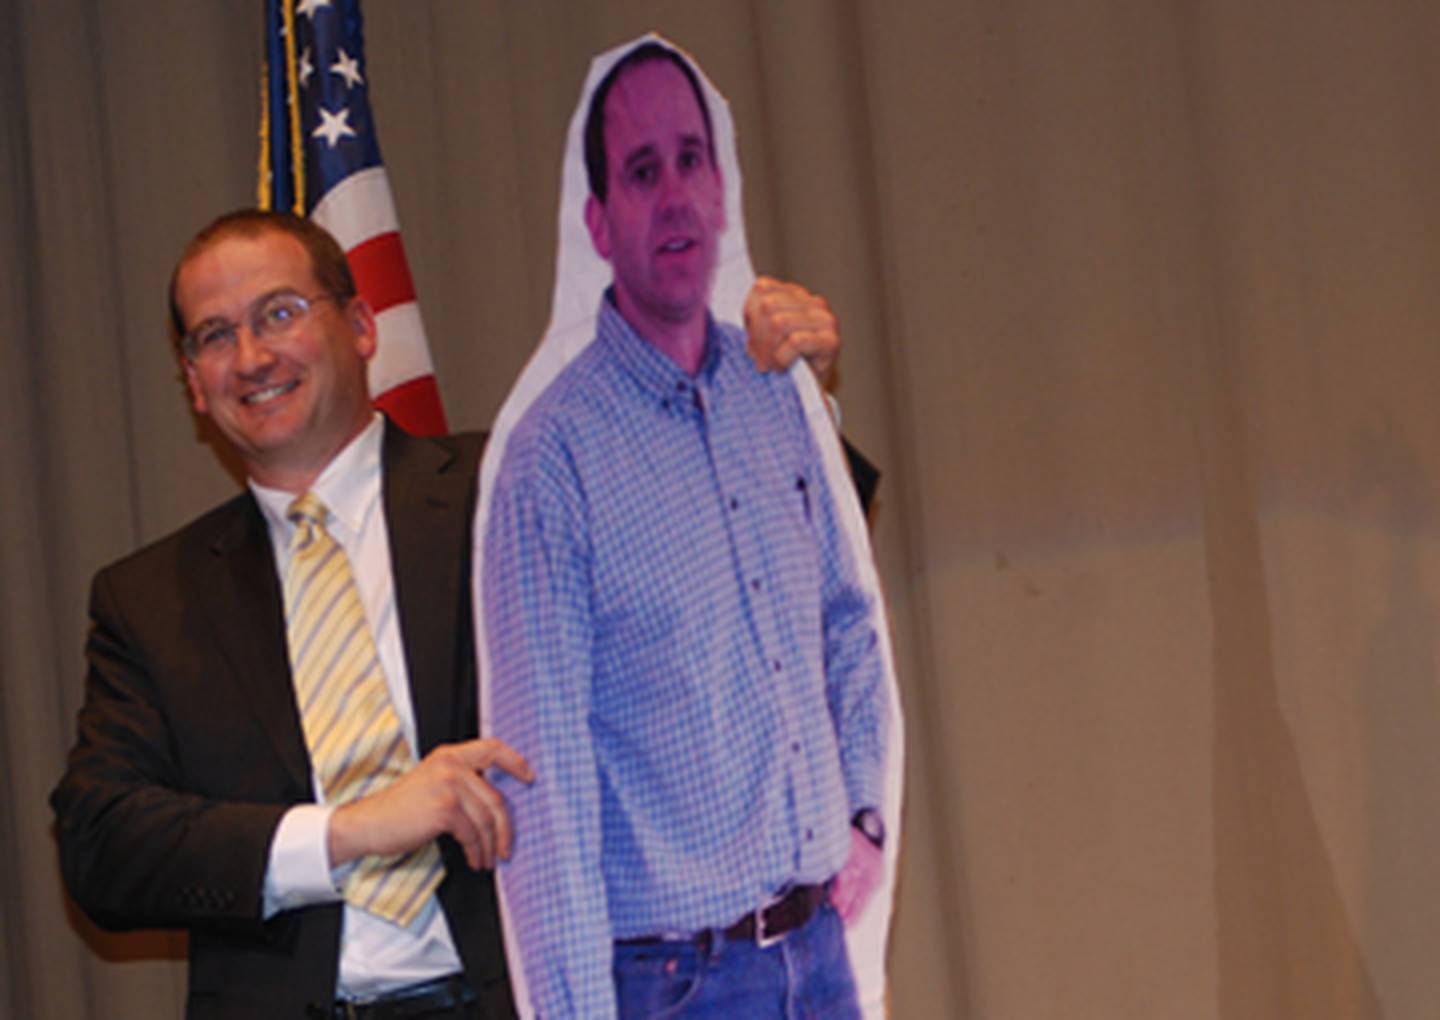 Jeff Maierhofer stands with the life-size cutout of fellow FFA advisor and Seneca Township High School ag teach Kent Weber he received during the FFA Banquet Saturday. Weber received a similar likeness of Maierhofer from FFA members at the annual event.